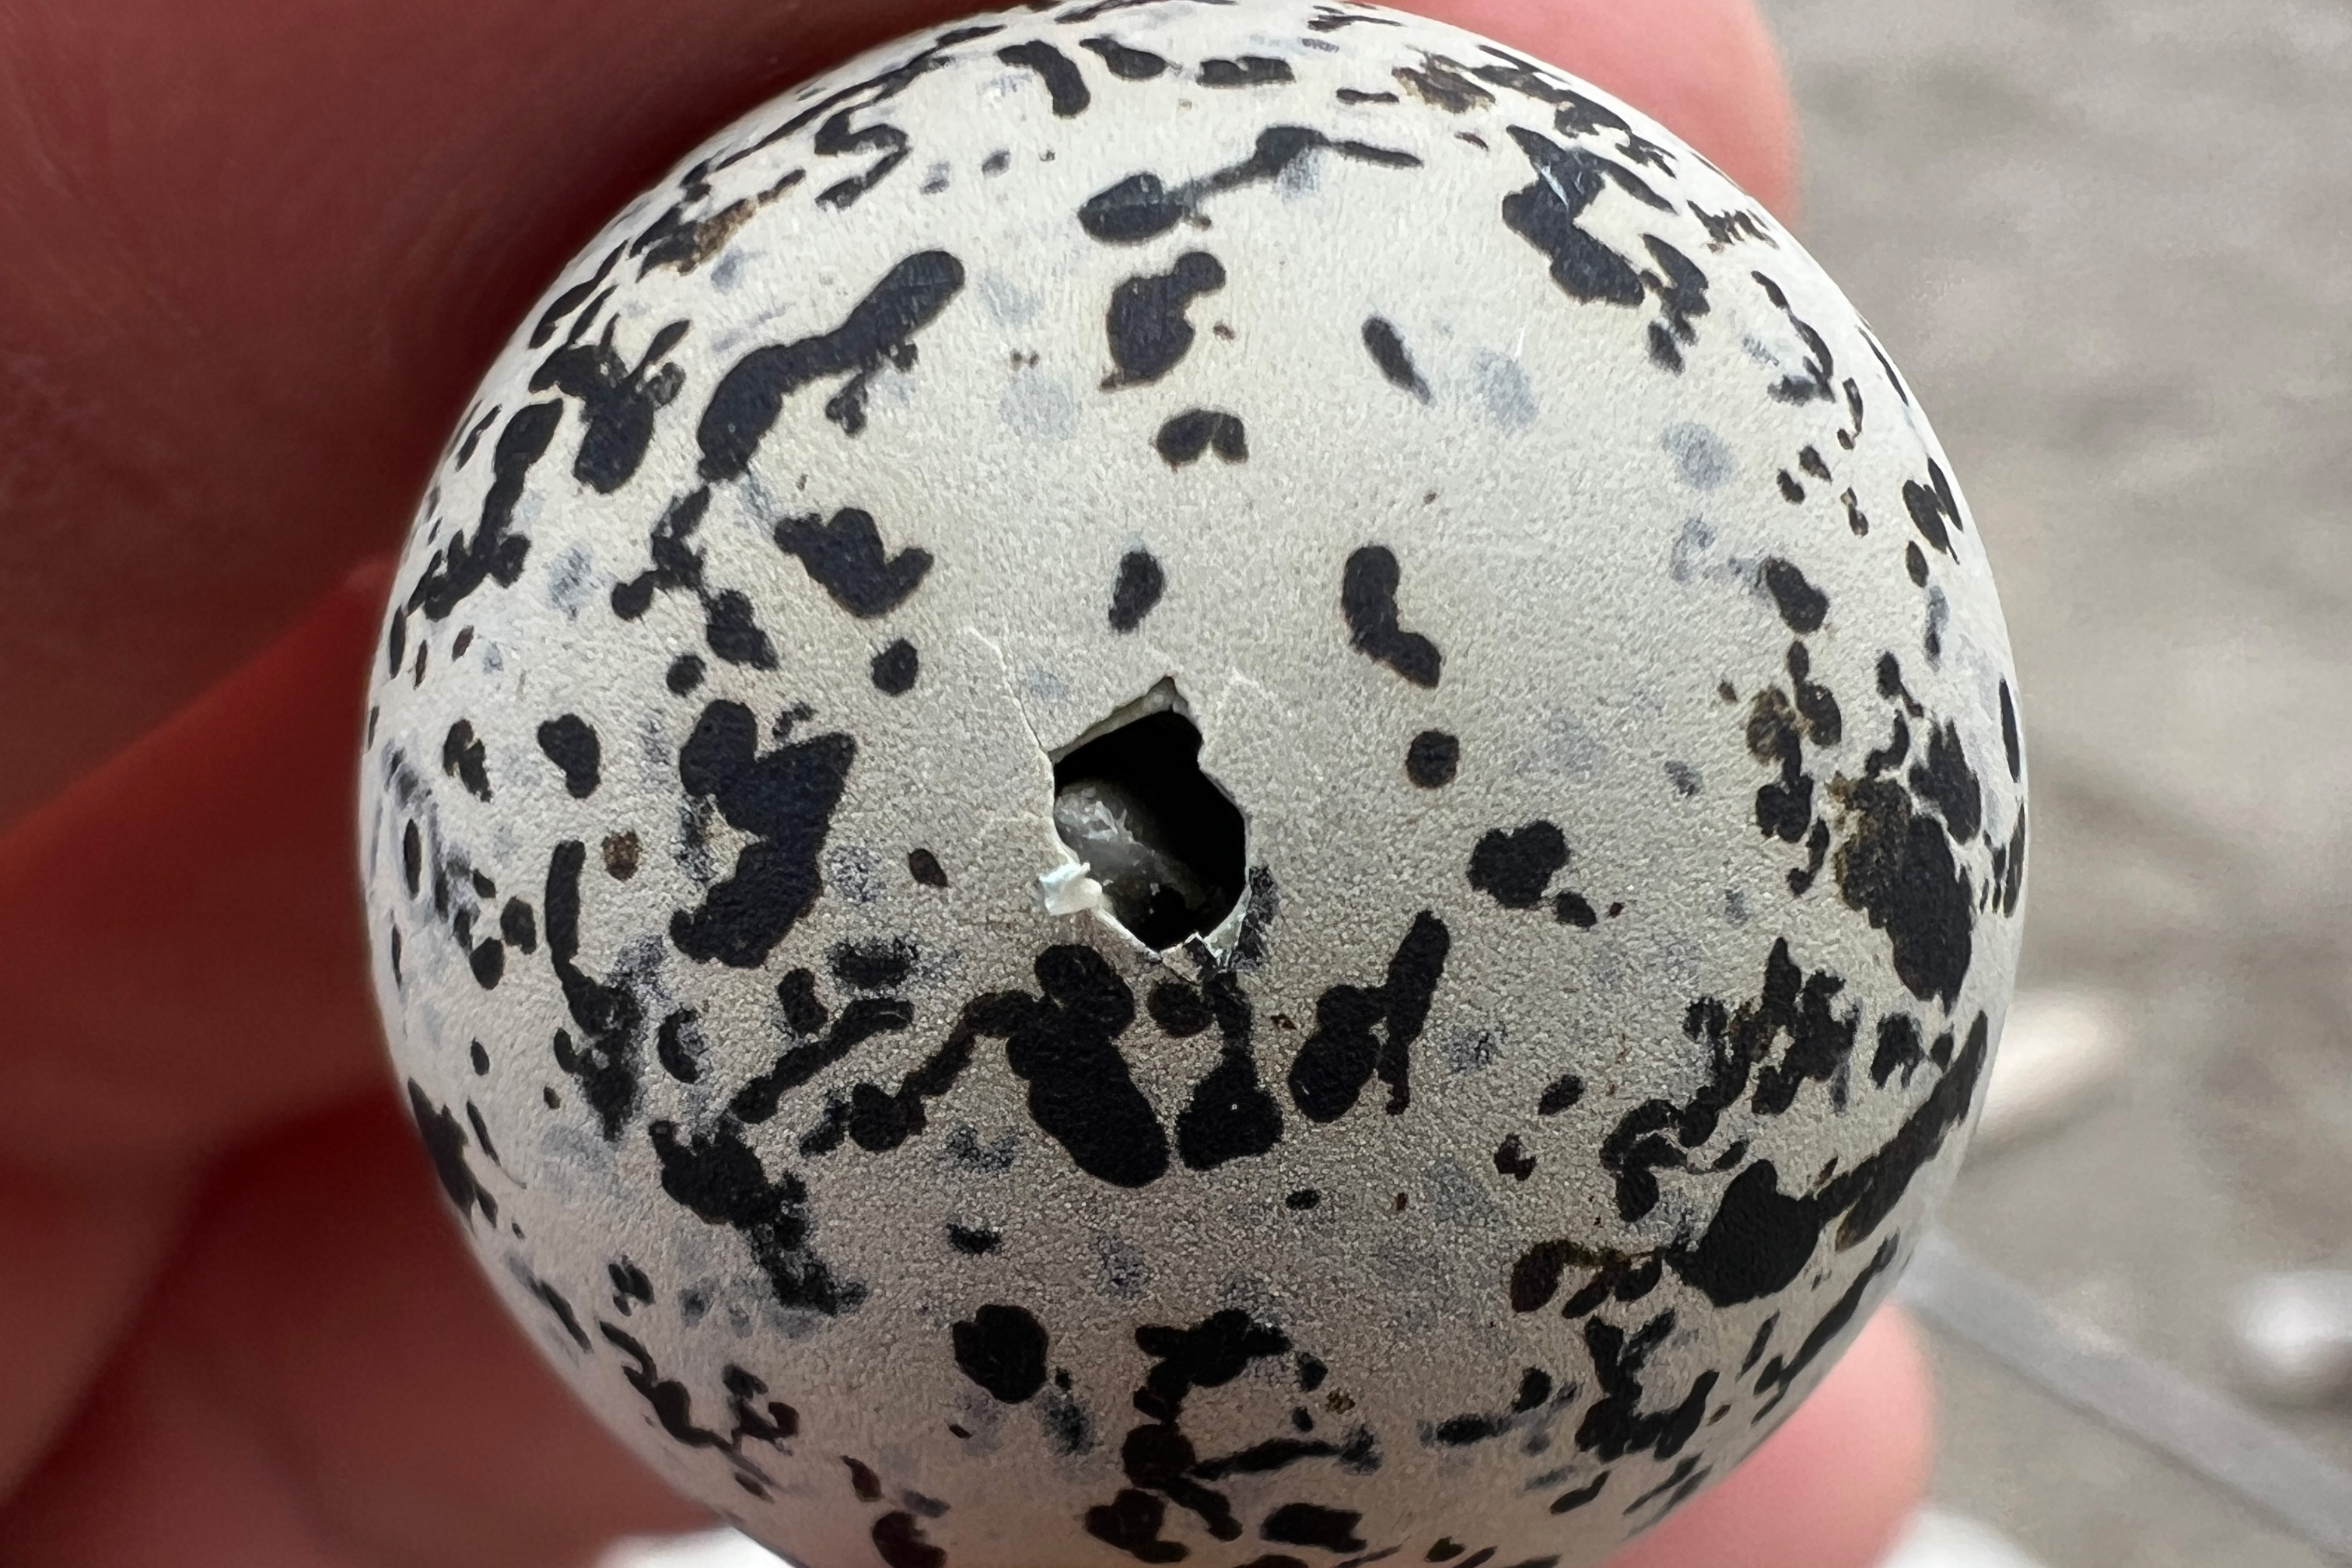 A photo of a small black-speckled, beige-colored egg with a small hole poked through the shell from the inside and the chick's beak is partially visible through the hole.